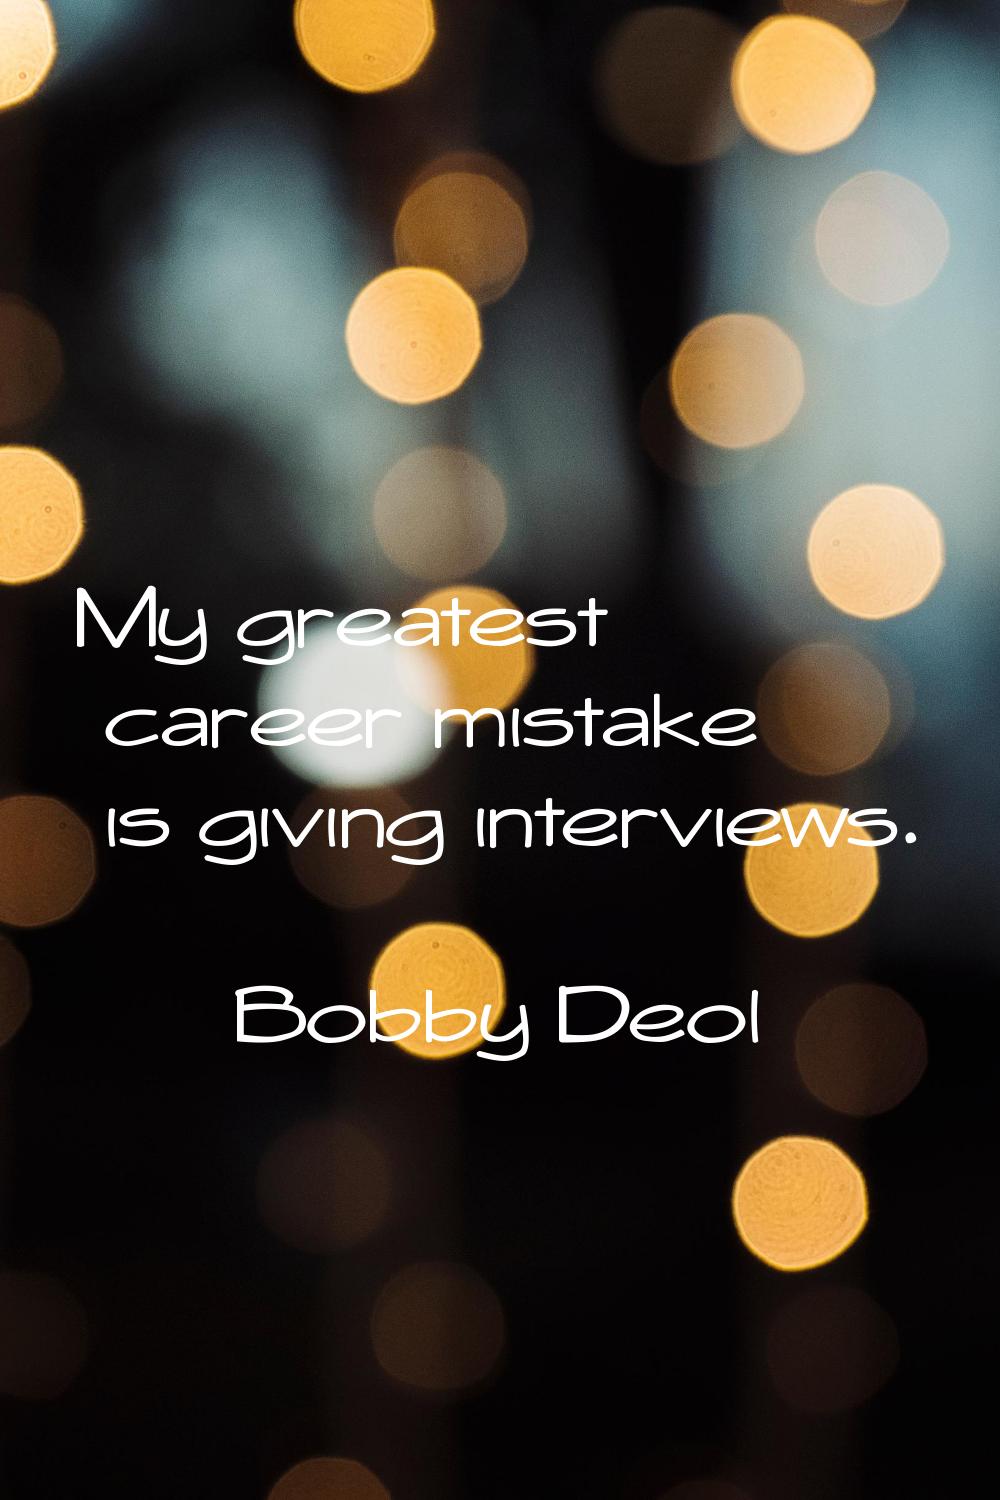 My greatest career mistake is giving interviews.